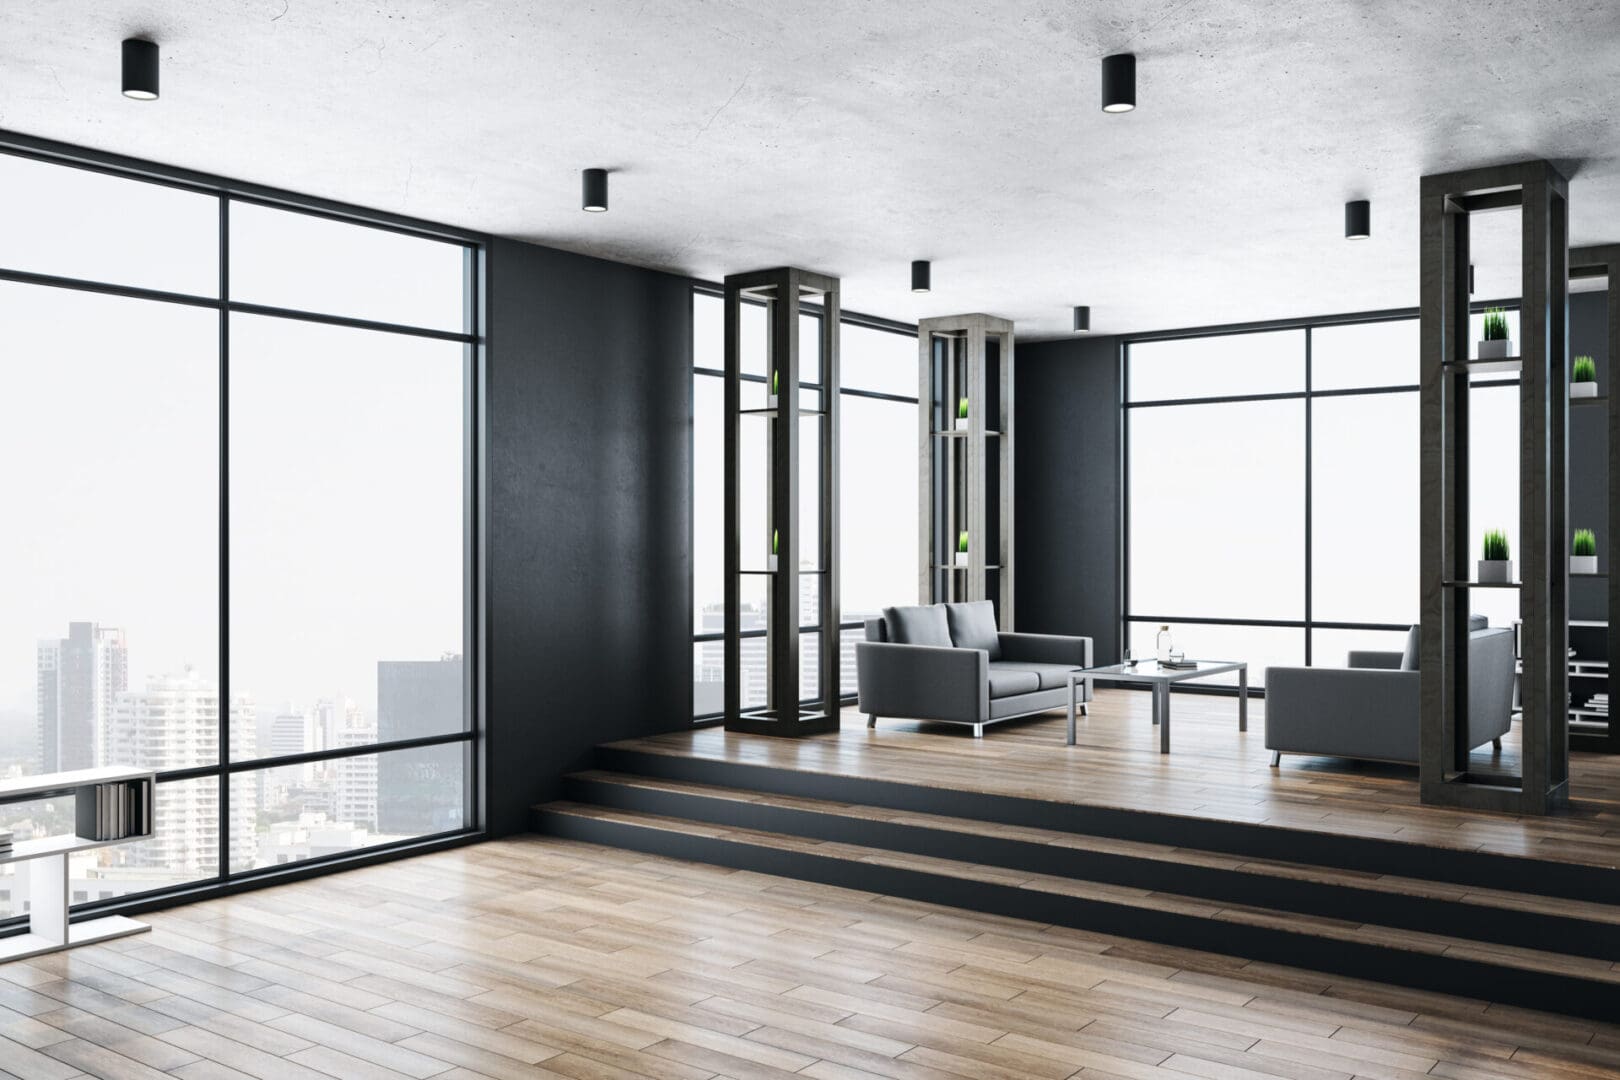 A living room with wooden floors and black walls.